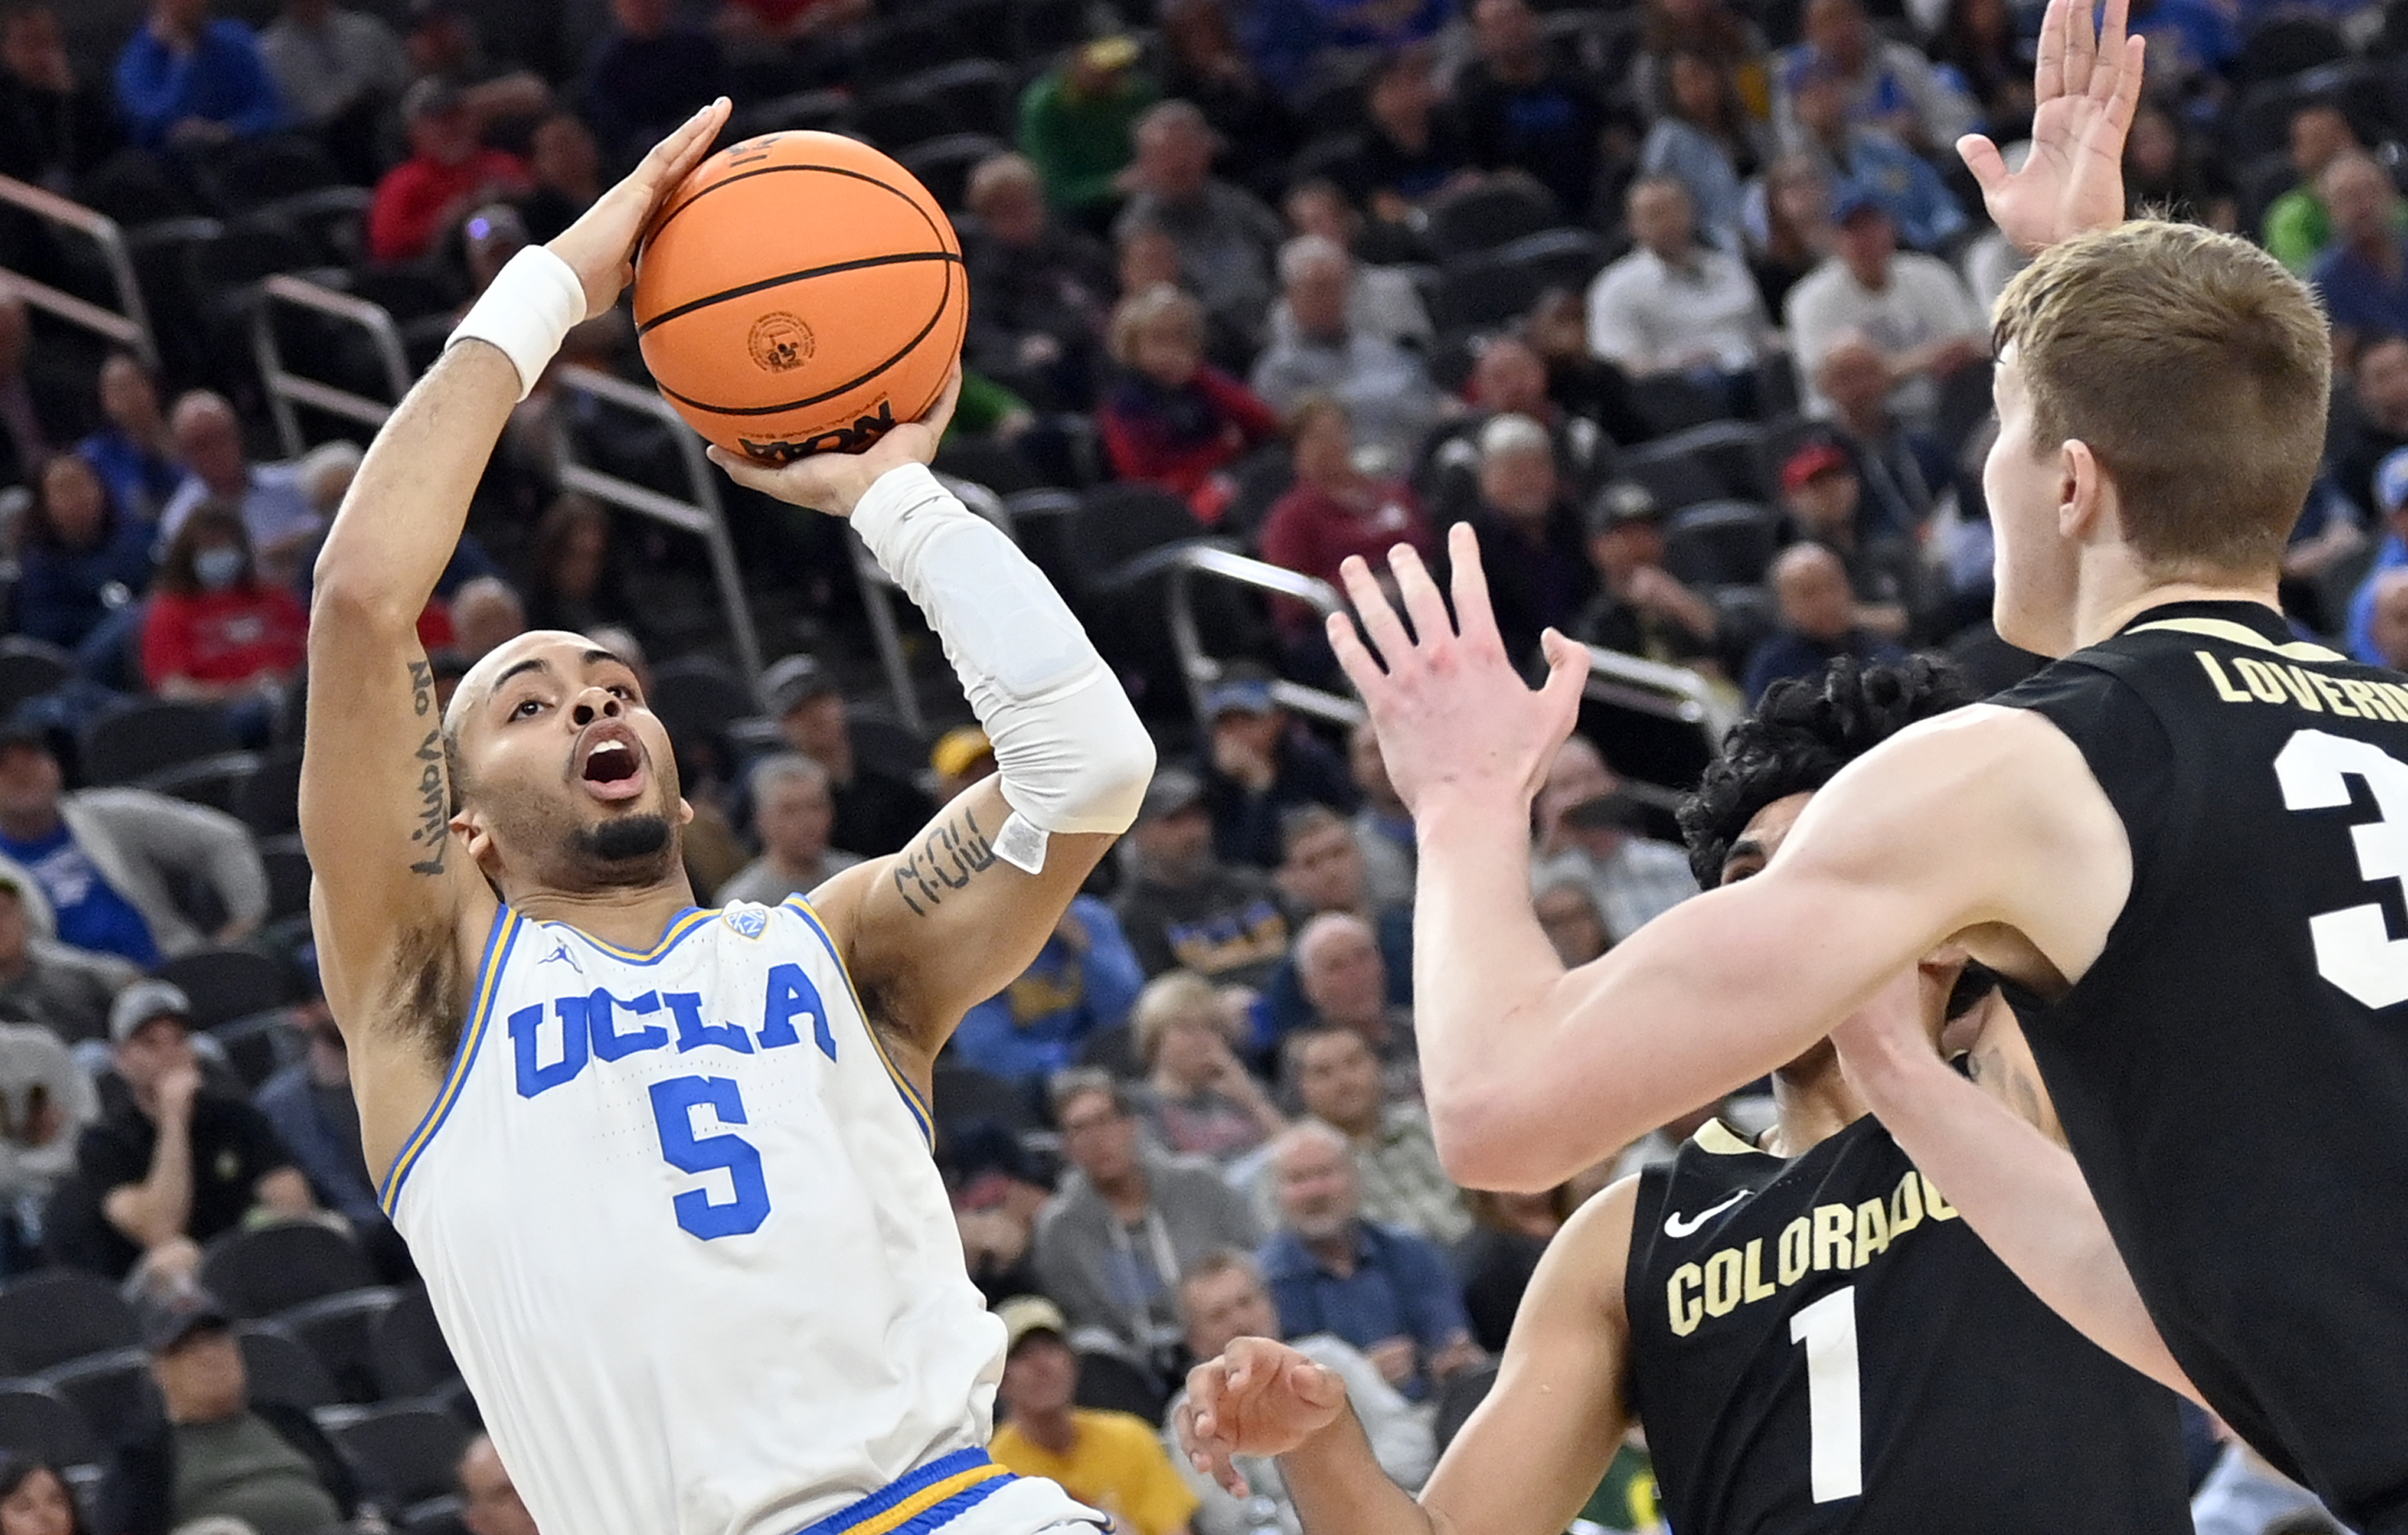 UCLA's Amari Bailey is used to the spotlight, but he's about